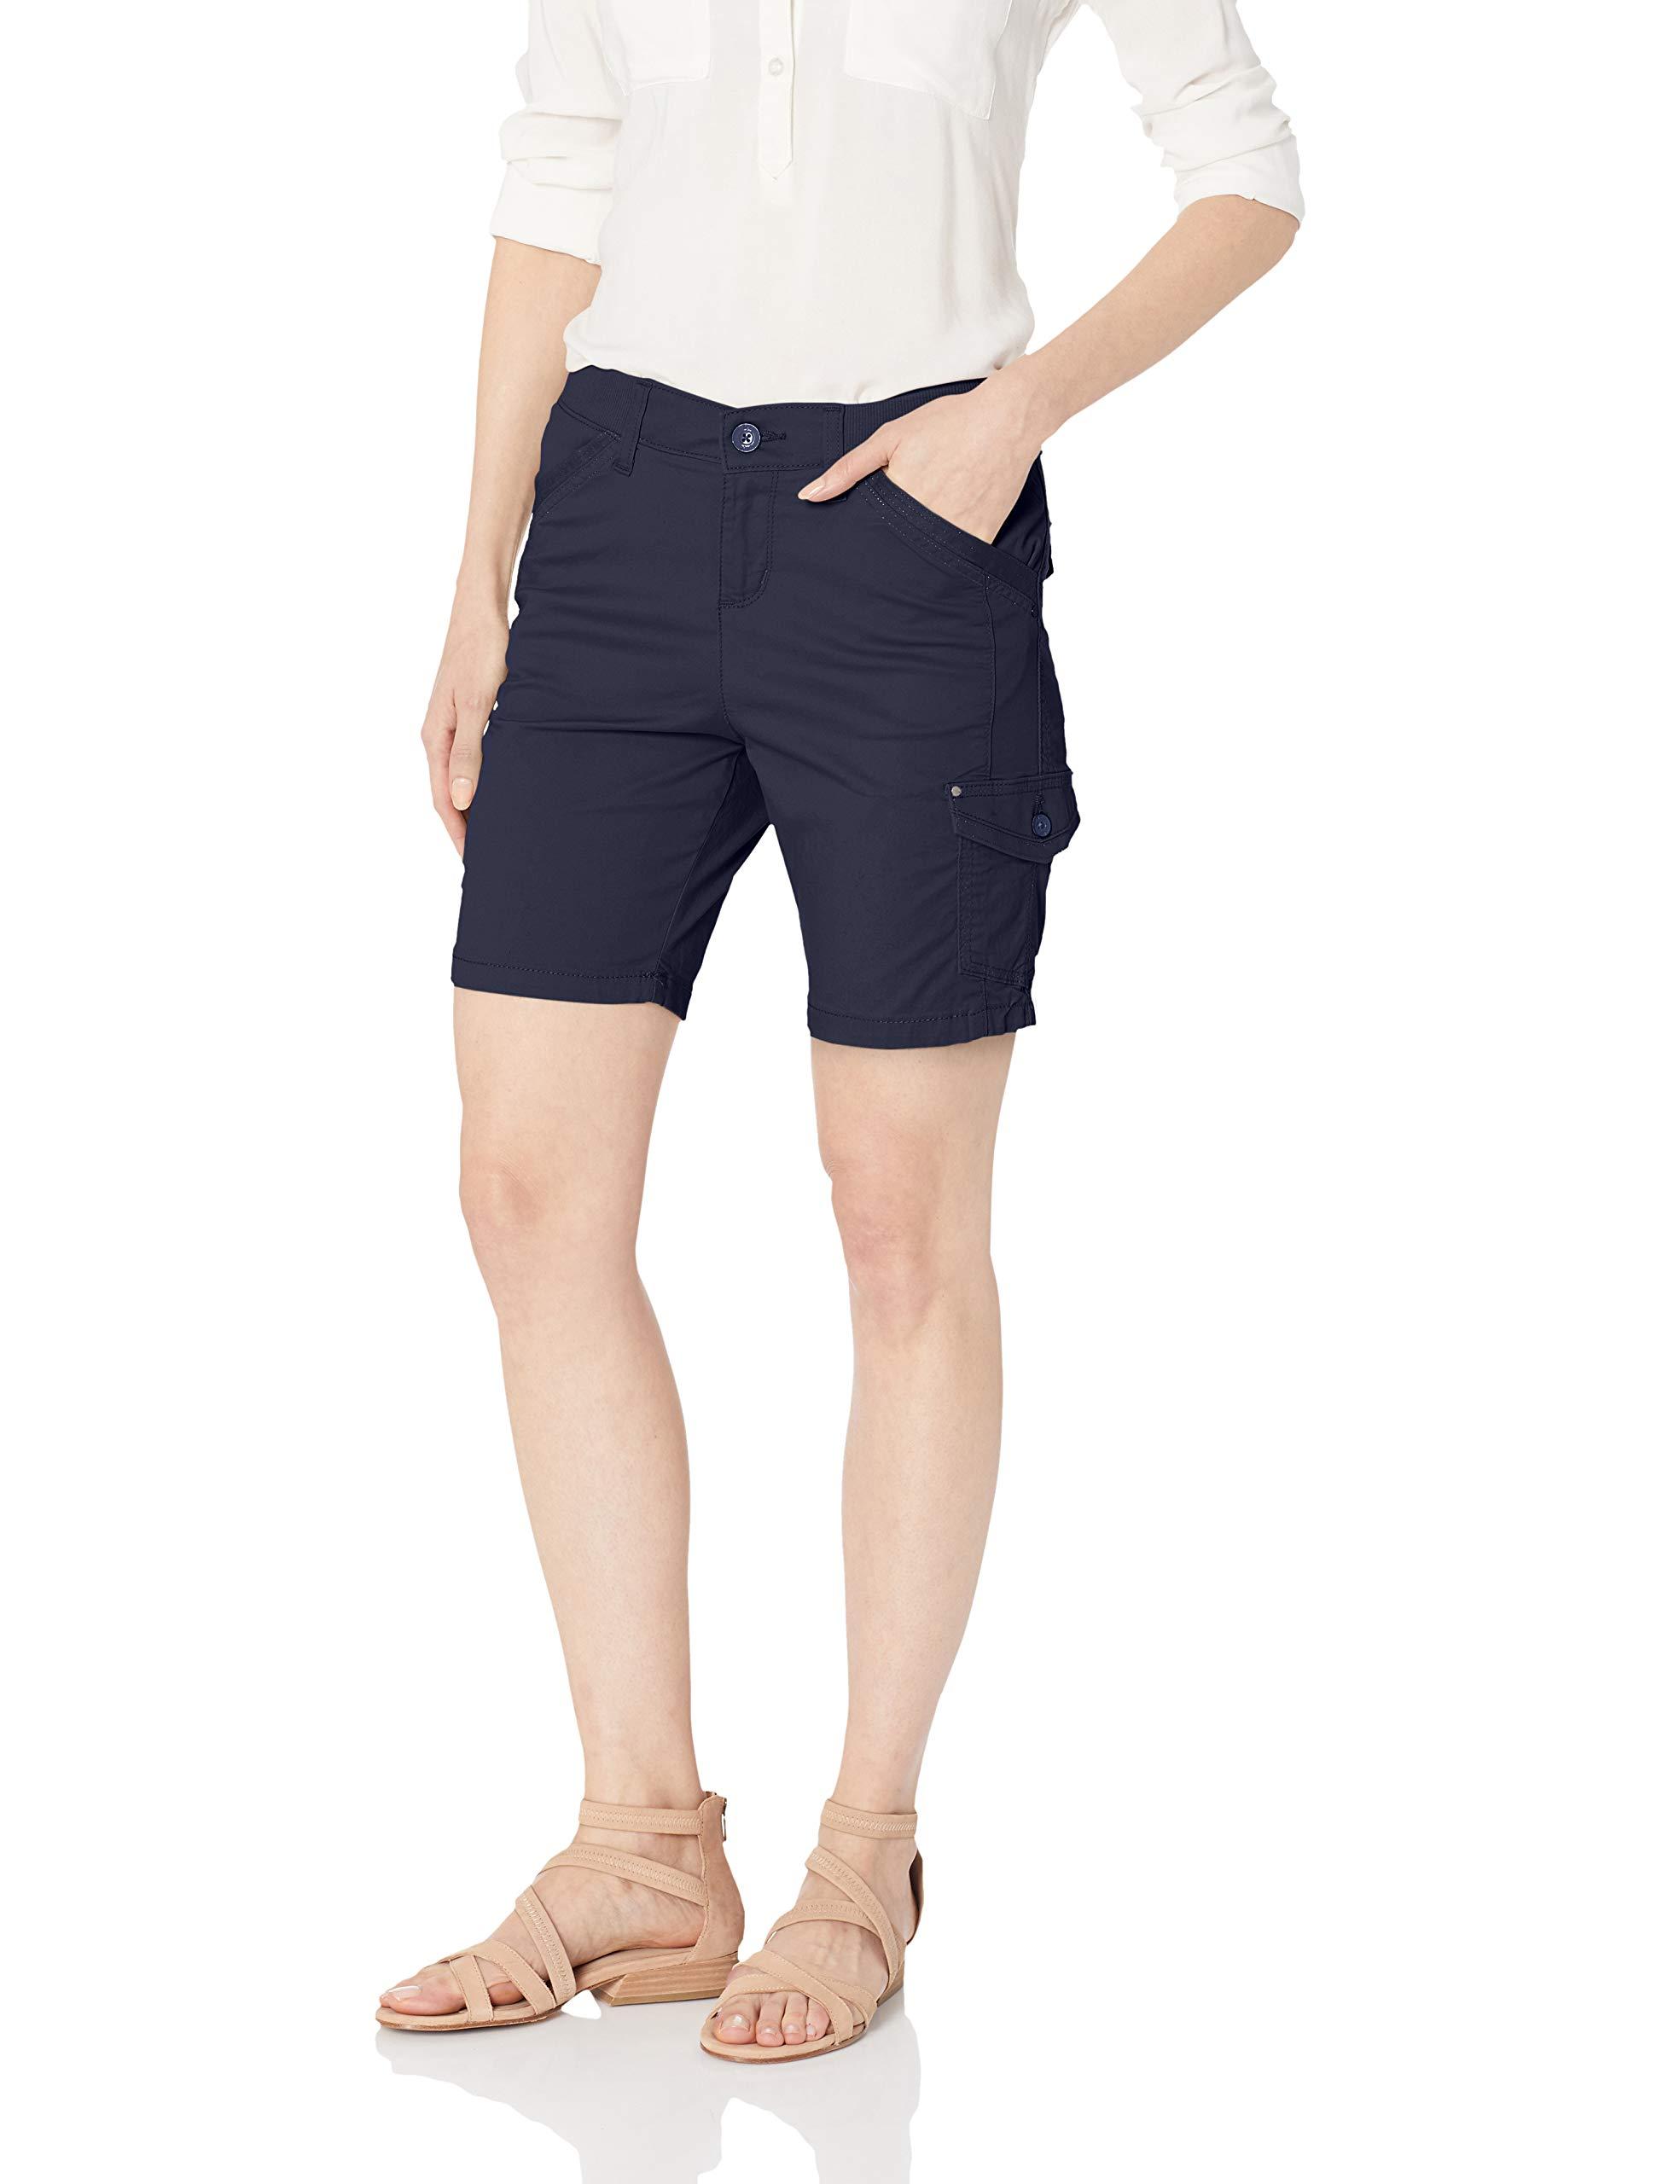 Lee Jeans Flex-to-go Relaxed Fit Cargo Bermuda Short in Blue - Lyst